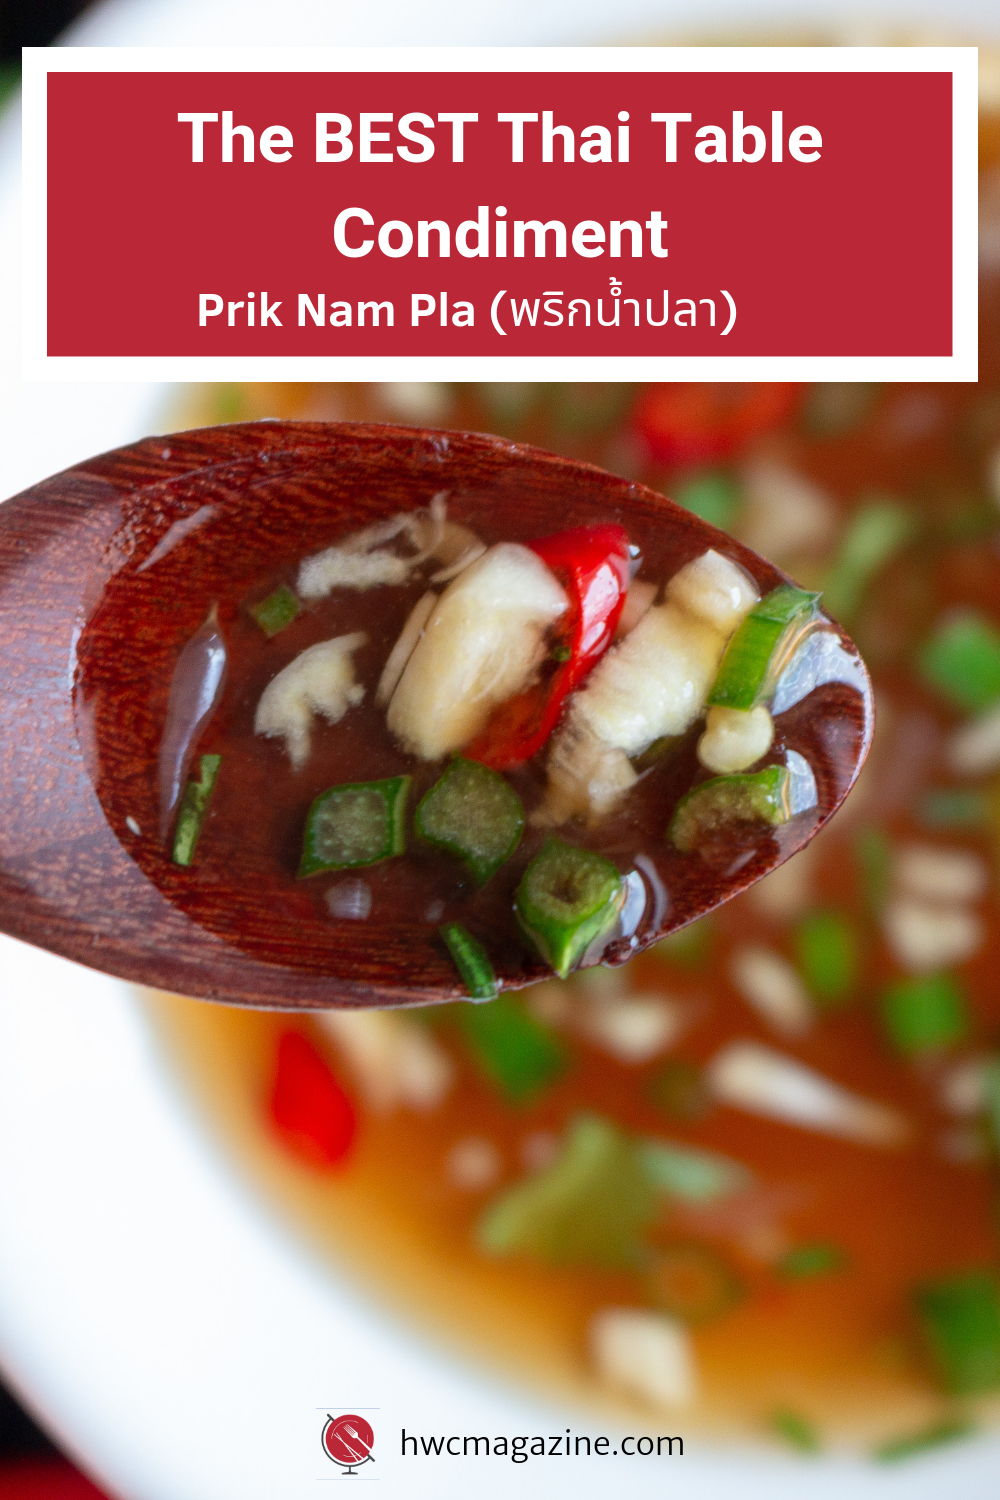 Prik Nam Pla (พริกน้ำปลา) is an incredible Thai Table Condiment sauce made with chilis, fish sauce and aromatics that we love slathering on everything from spring rolls to seafood and everything in between. #sauce #Thai #asian #chili #condiment #fishsauce #garlic #easyrecipe #healthyrecipe/ https://www.hwcmagazine.com